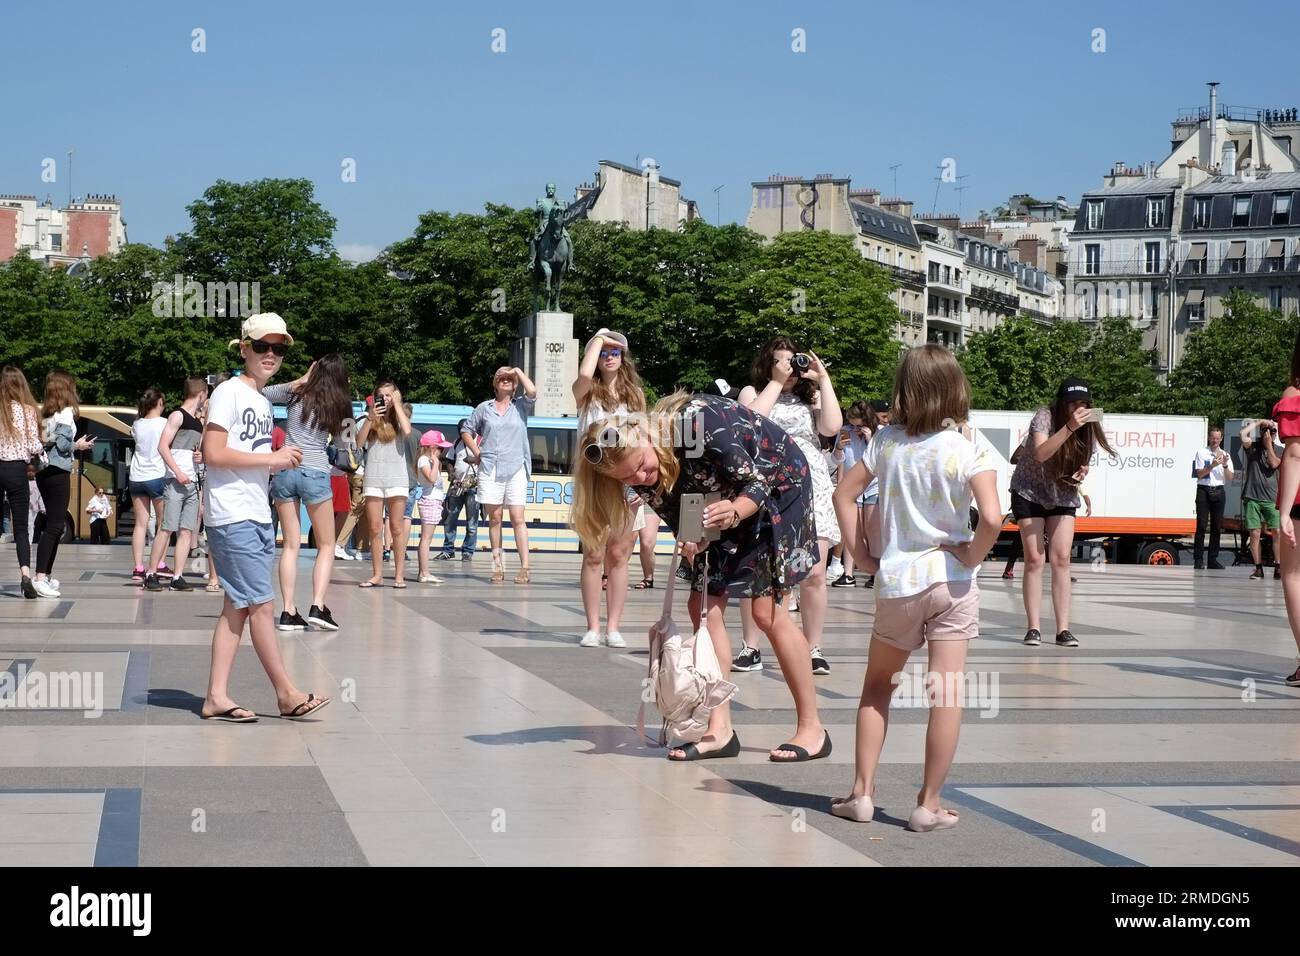 In Place du Trocadéro a mother bends double photographing her young daughter with 'Paris's best view of the Eiffel Tower' on a sunny summer day Stock Photo